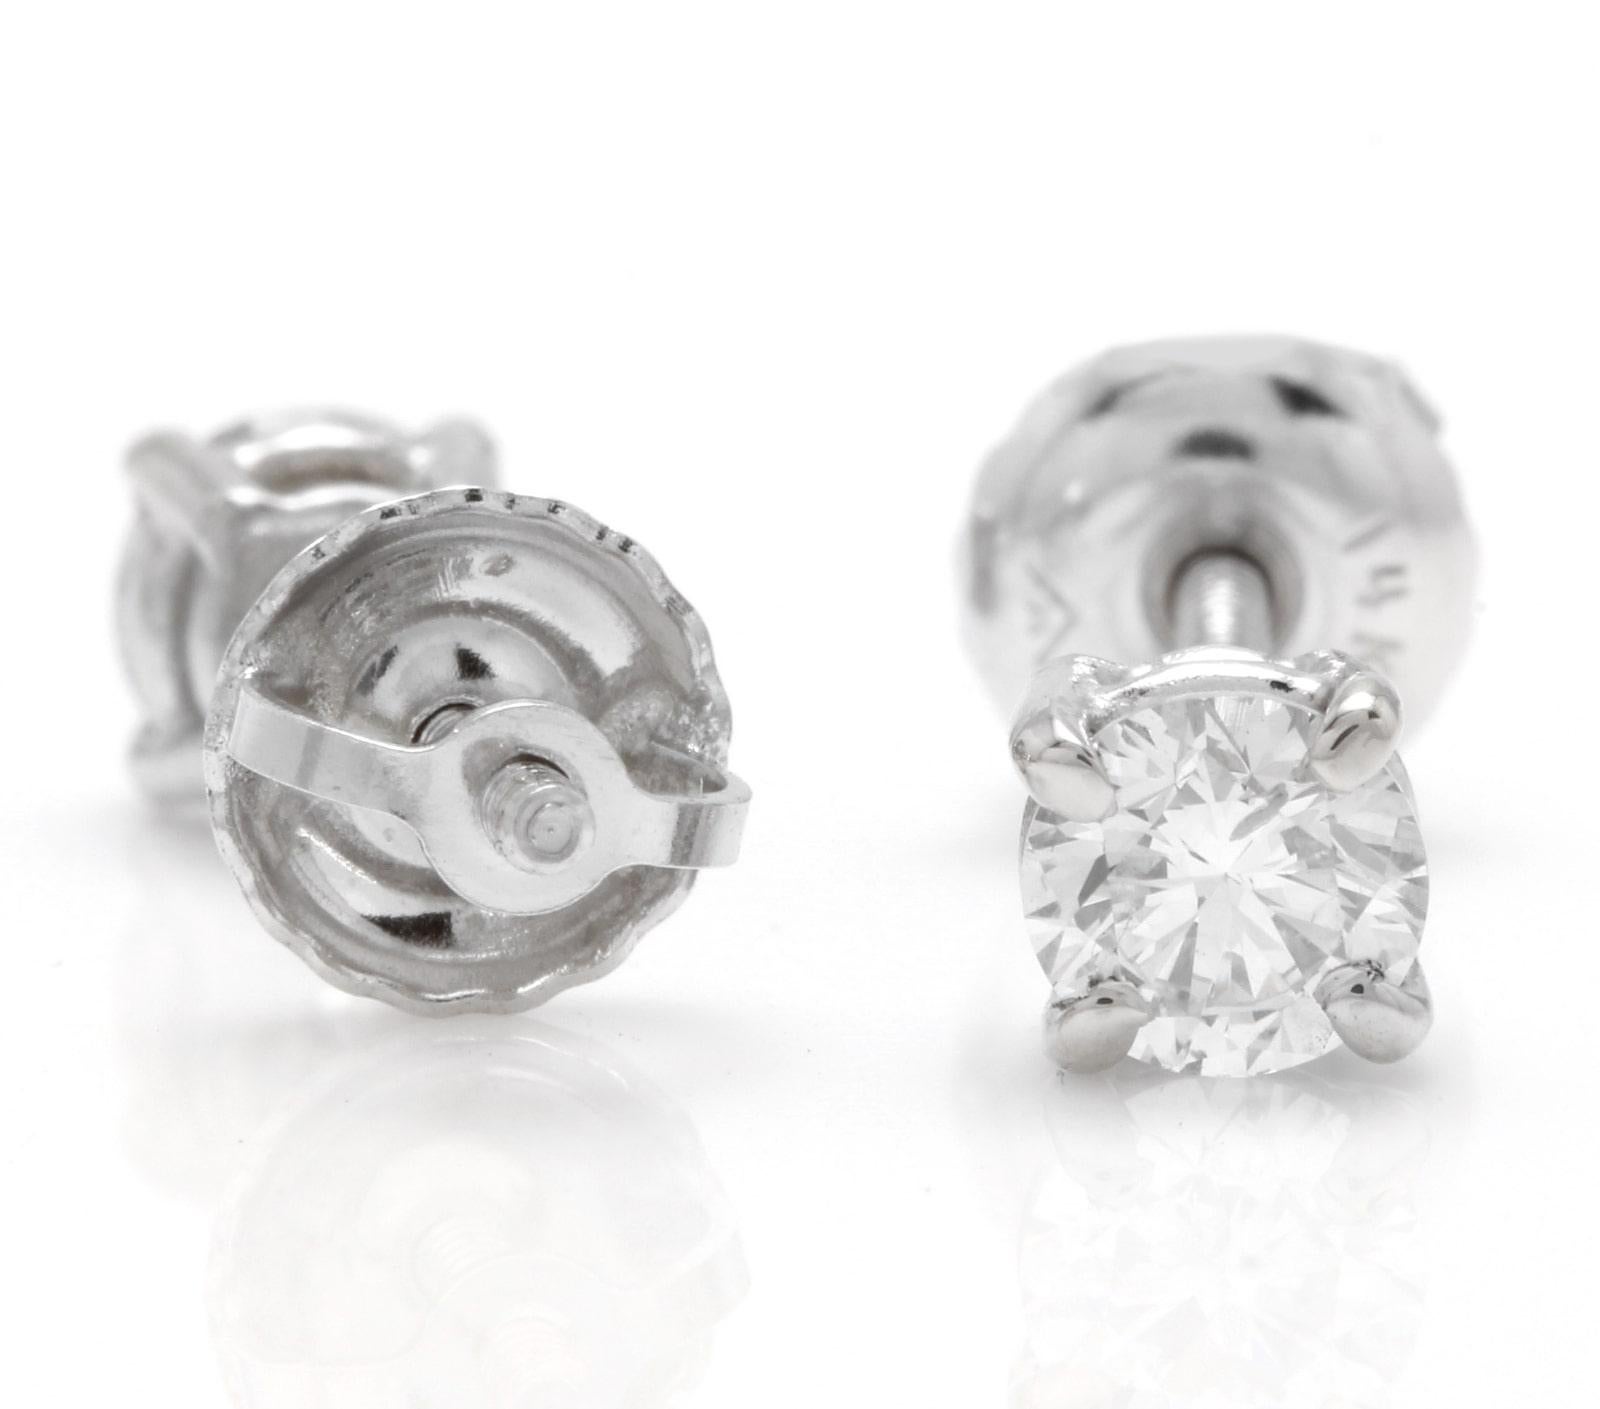 Exquisite 0.50 Carats Natural Diamond 14K Solid White Gold Stud Earrings

Amazing looking piece!

Total Natural Round Cut Diamonds Weight: 0.50 Carats (both earrings) VS2-S1 / G

Diamond Measures: Approx. 4.00mm

Total Earrings Weight is: 1.2